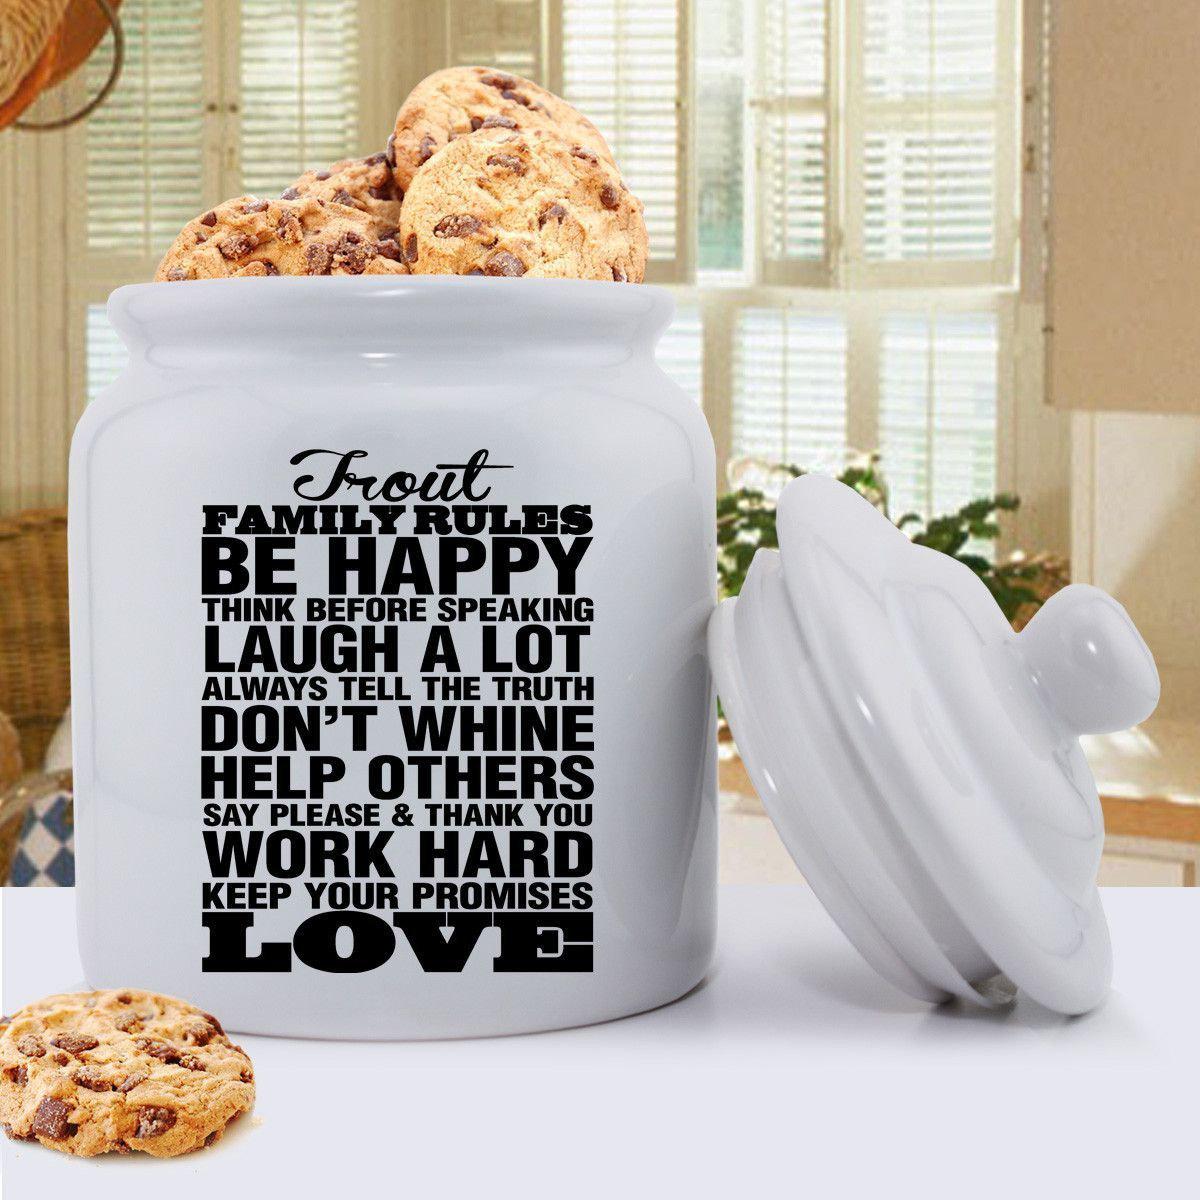 Personalized Antique Style Family Rules Cookie Jar